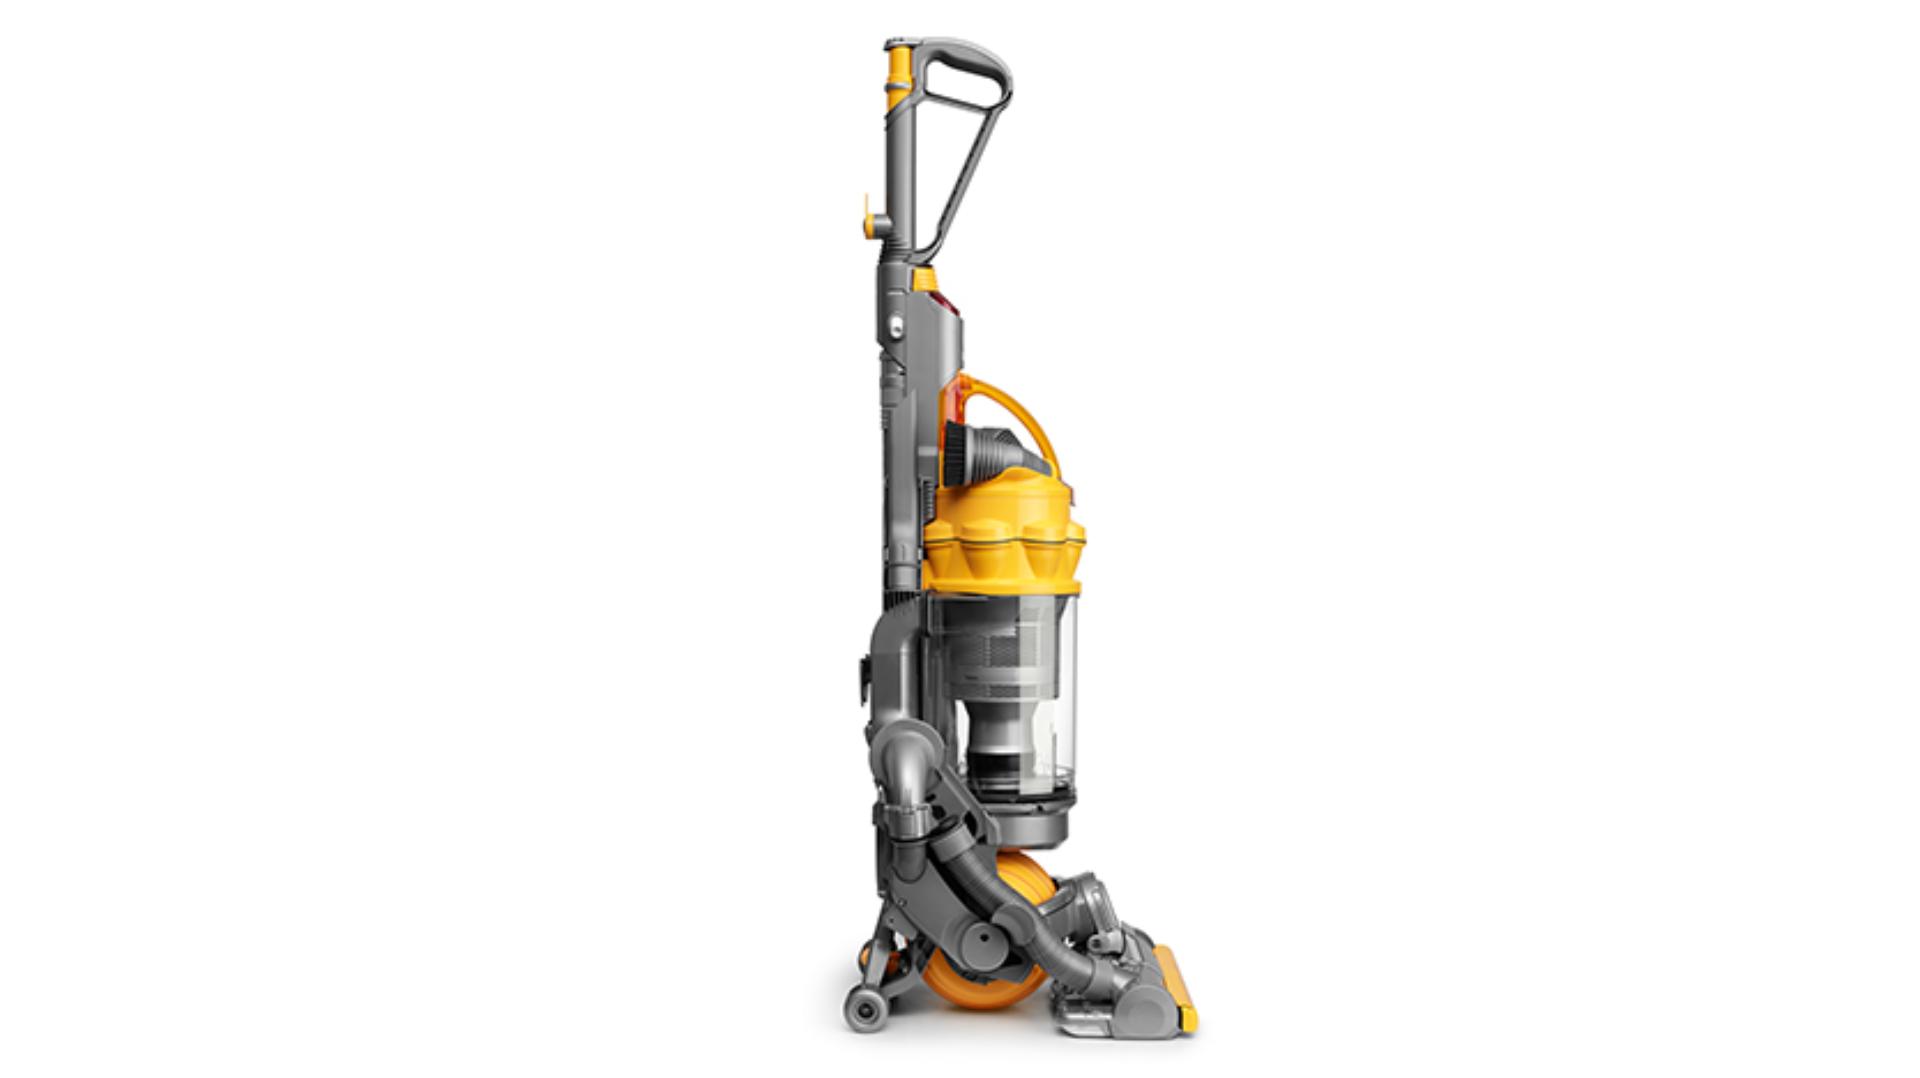 Side view of the DC15 upright vacuum